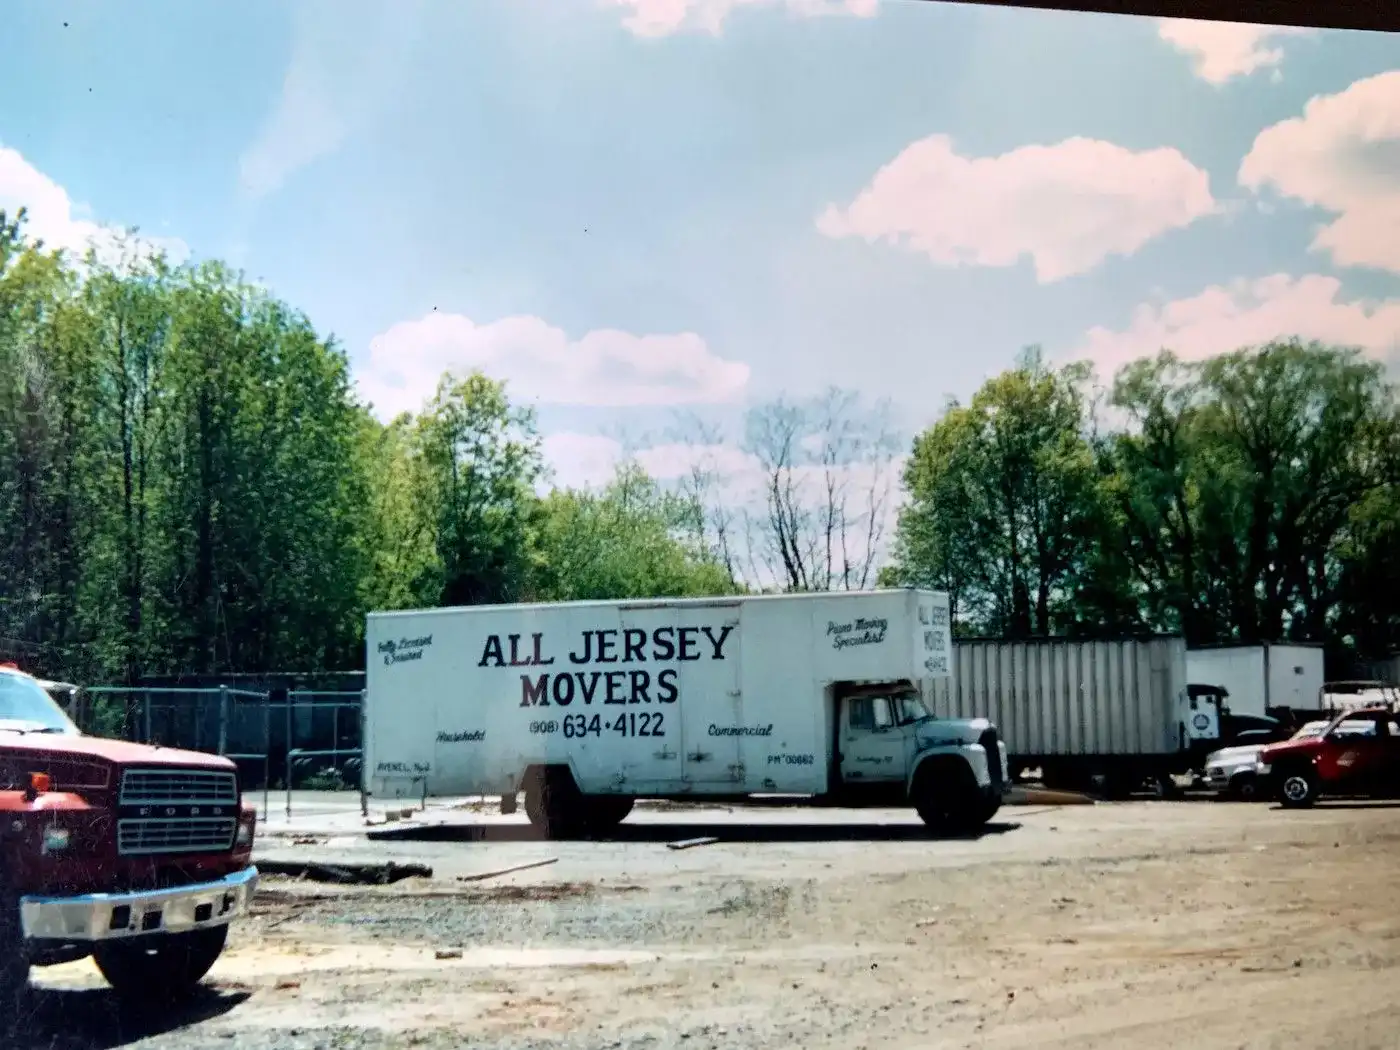 A white moving truck from All Jersey Movers is standing in the parking